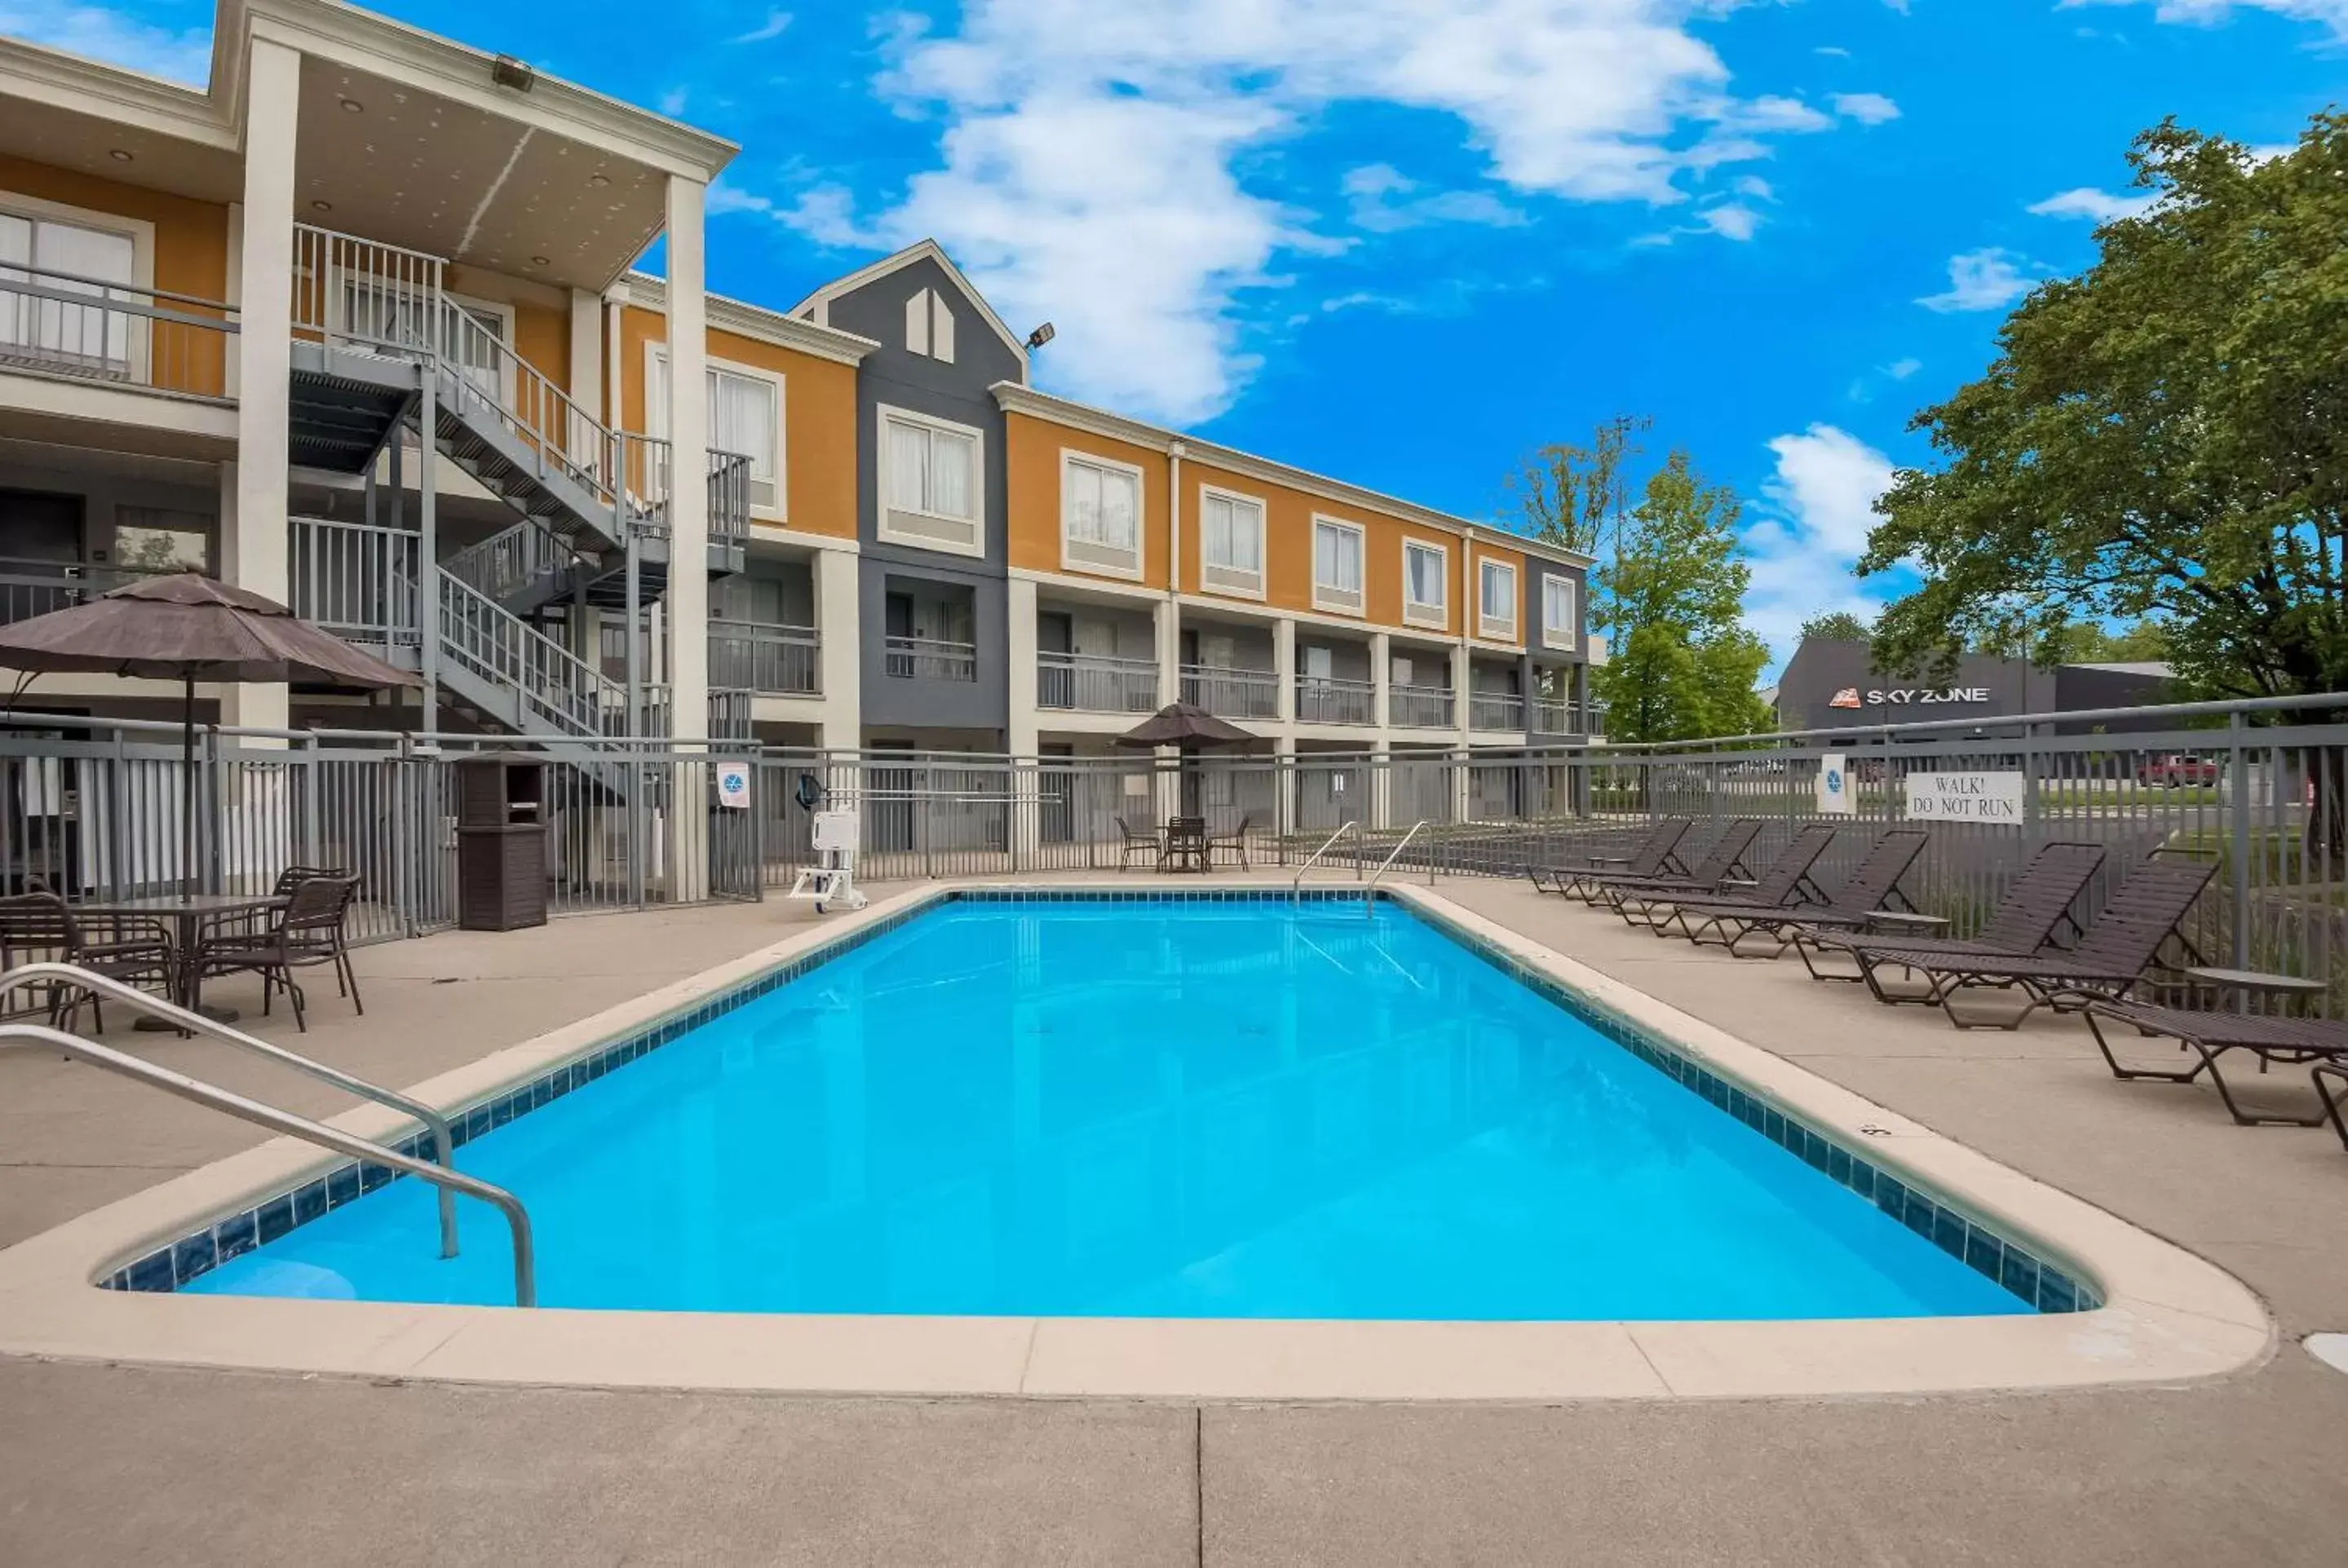 Swimming Pool in Clarion Pointe Indianapolis Northeast